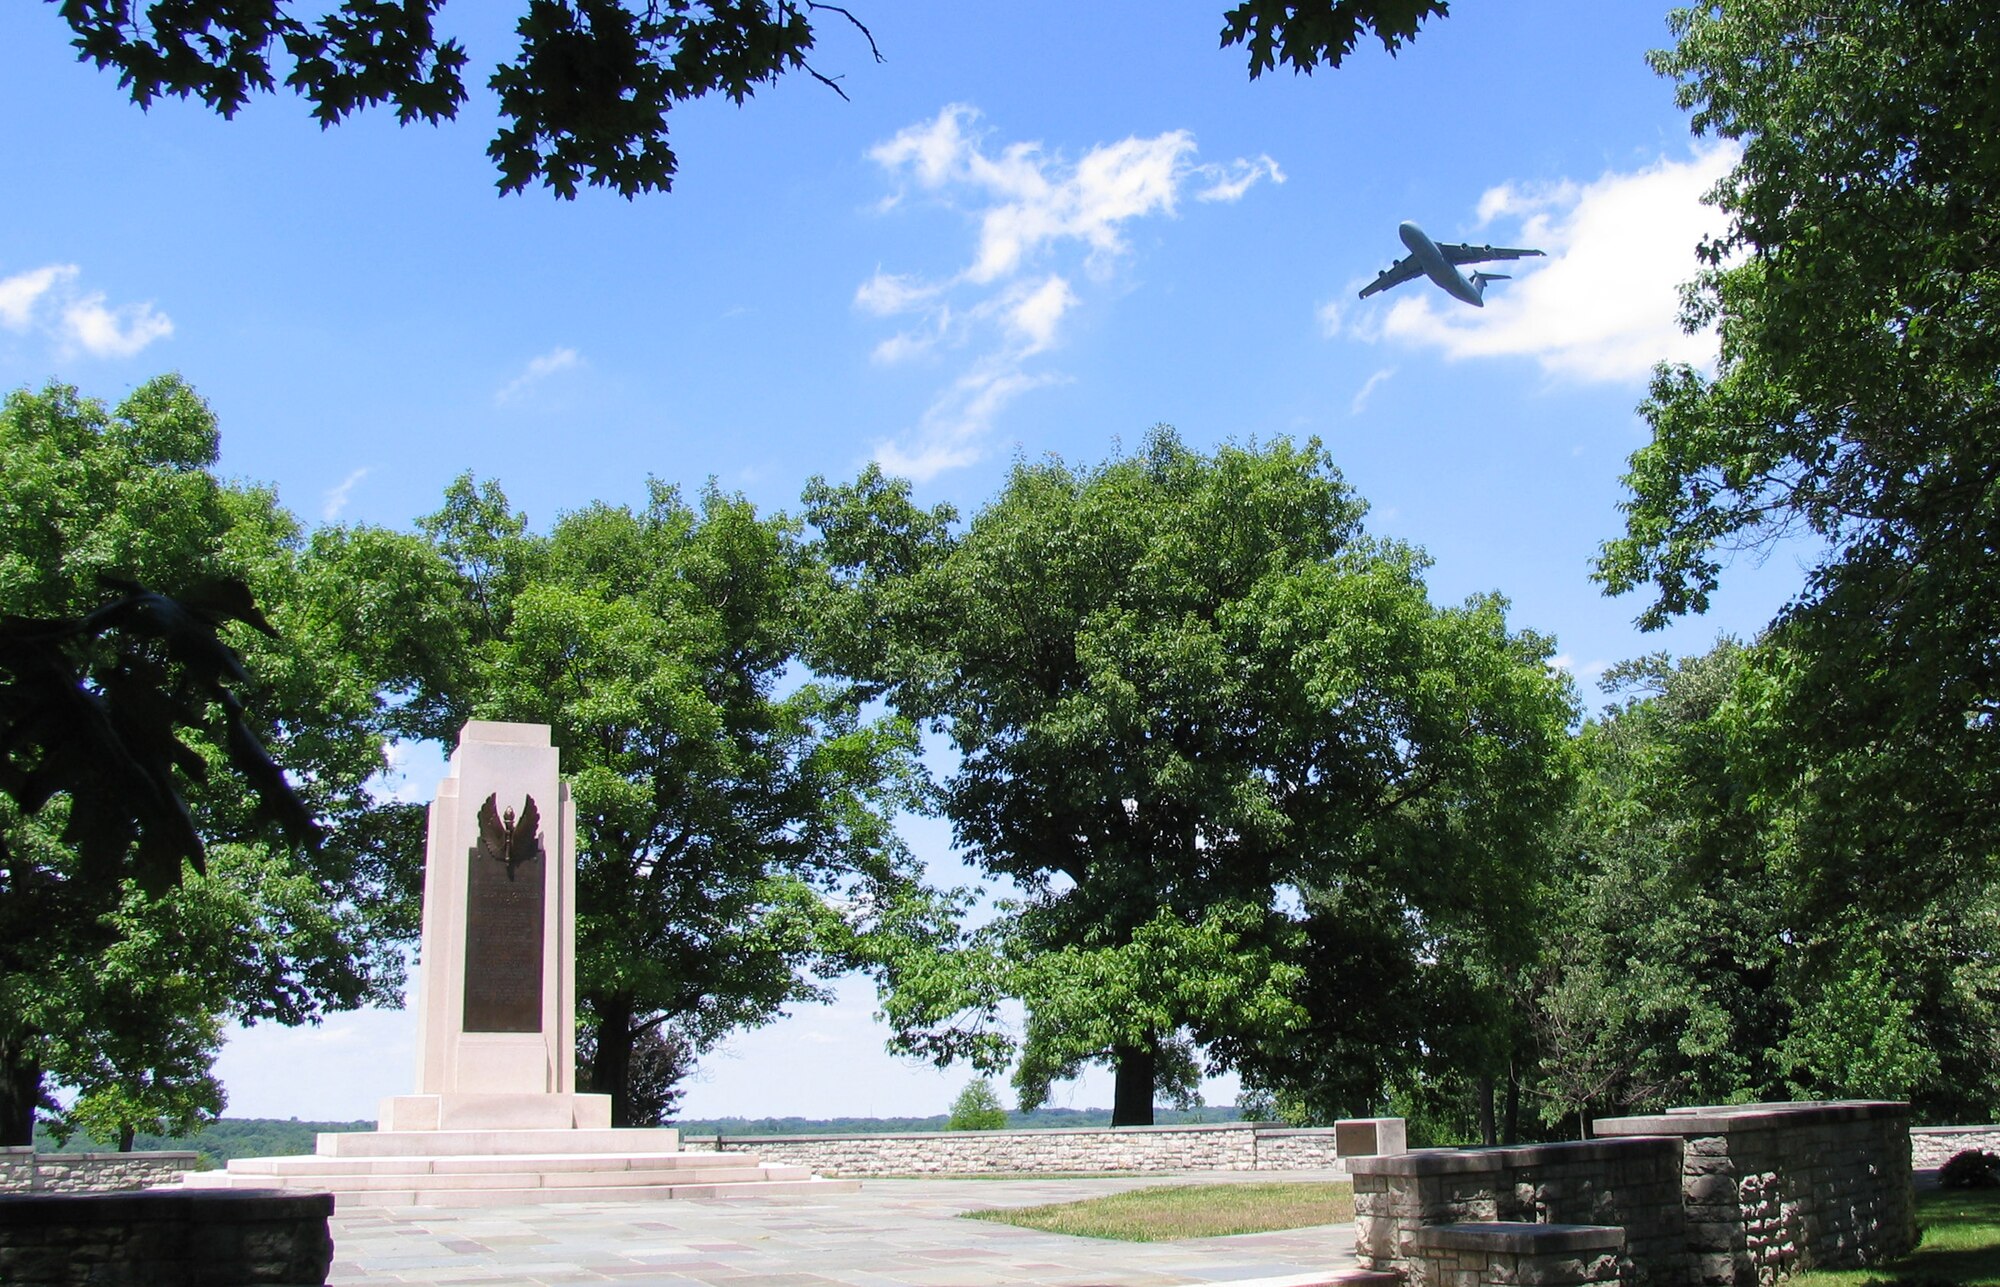 A C-5 Galaxy overflys the Wright Brothers Memorial which overlooks the main runway at Wright-Patterson Air Force Base, Ohio.  Dedicated in 1940, the memorial commemorates Dayton inventors Orville and Wilbur Wright and their contributions to manned powered flight. It is now part of the Dayton Aviation Heritage National Historic Park. (Photo courtesy National Park Service)